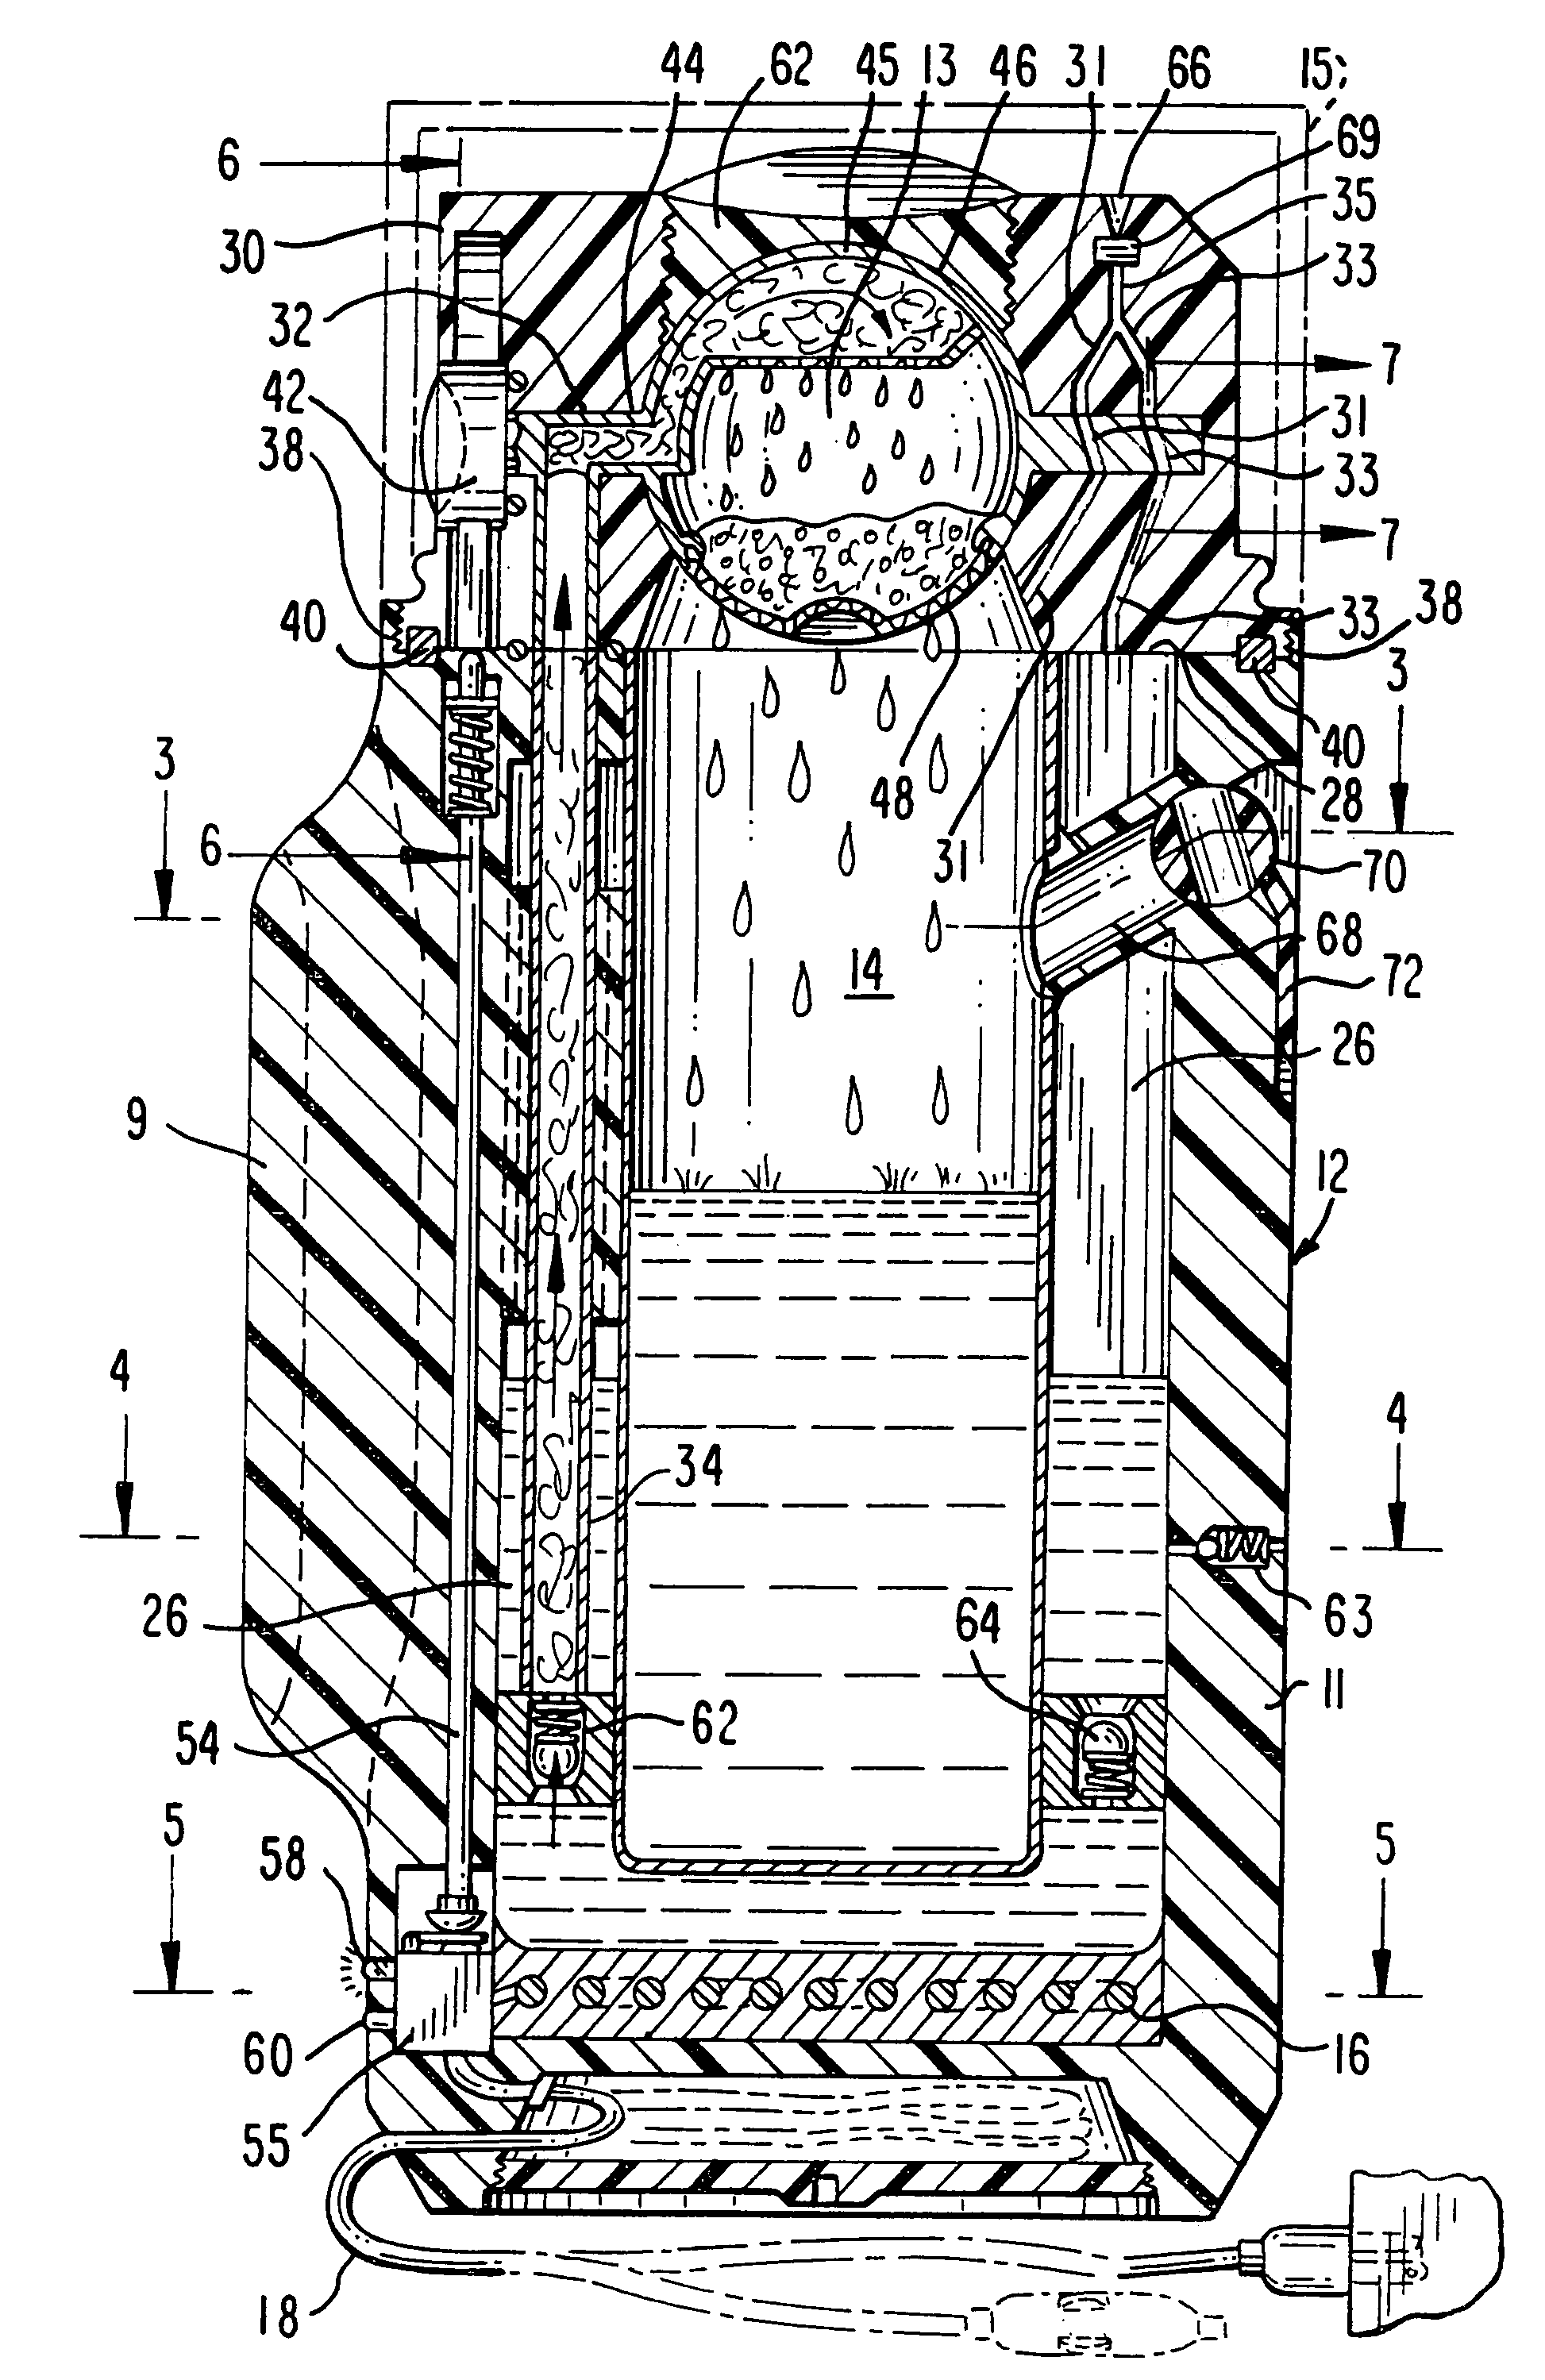 Apparatus for brewing beverages such as coffee and the like